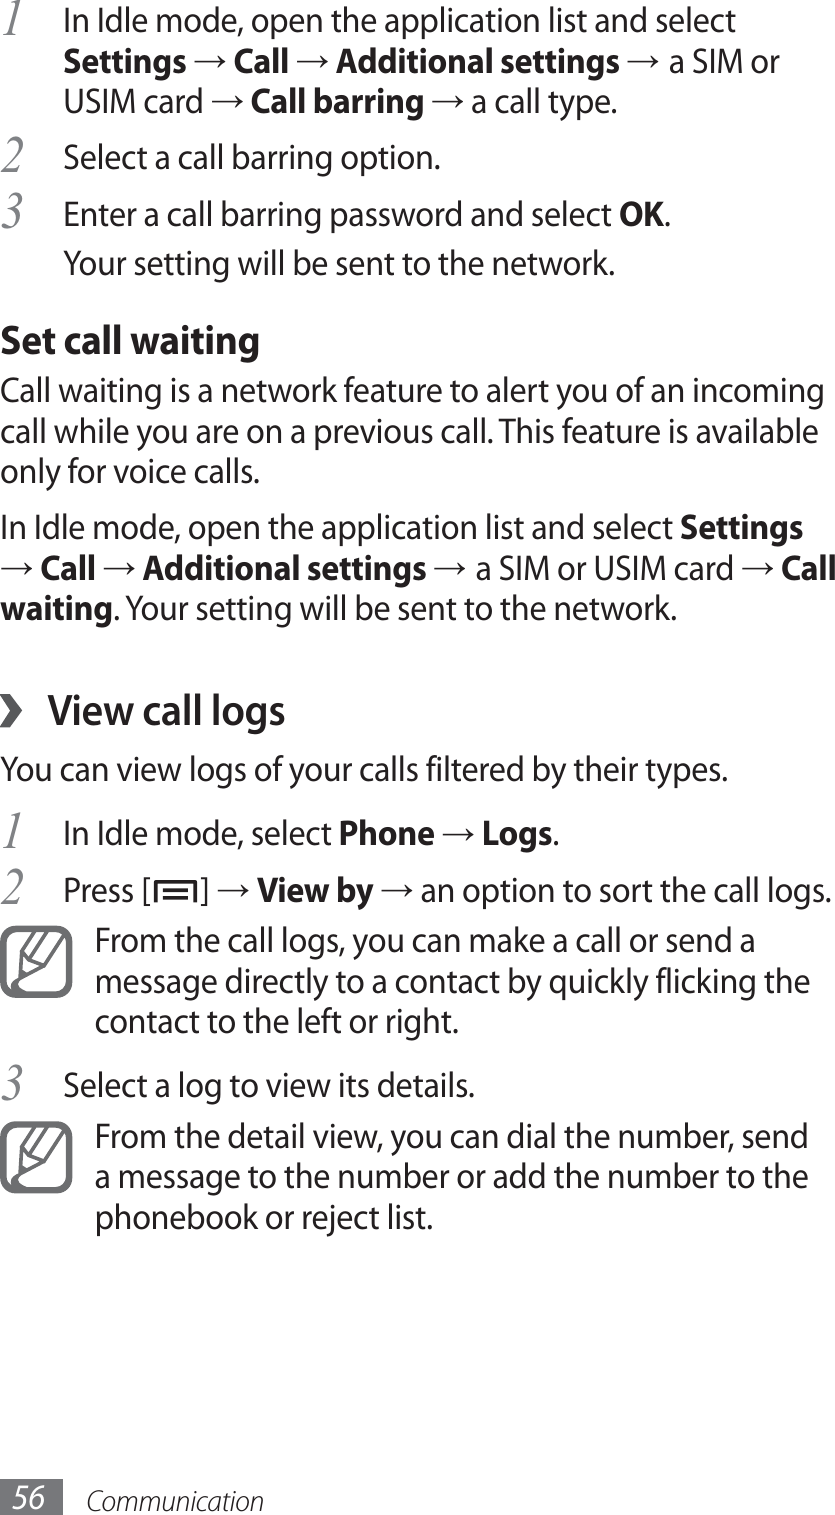 Communication56In Idle mode, open the application list and select 1 Settings → Call → Additional settings → a SIM or USIM card → Call barring → a call type.Select a call barring option.2 Enter a call barring password and select 3 OK.Your setting will be sent to the network.Set call waitingCall waiting is a network feature to alert you of an incoming call while you are on a previous call. This feature is available only for voice calls.In Idle mode, open the application list and select Settings → Call → Additional settings → a SIM or USIM card → Call waiting. Your setting will be sent to the network.View call logs ›You can view logs of your calls filtered by their types. In Idle mode, select 1 Phone → Logs.Press [2 ] → View by → an option to sort the call logs. From the call logs, you can make a call or send a message directly to a contact by quickly flicking the contact to the left or right.Select a log to view its details.3 From the detail view, you can dial the number, send a message to the number or add the number to the phonebook or reject list.